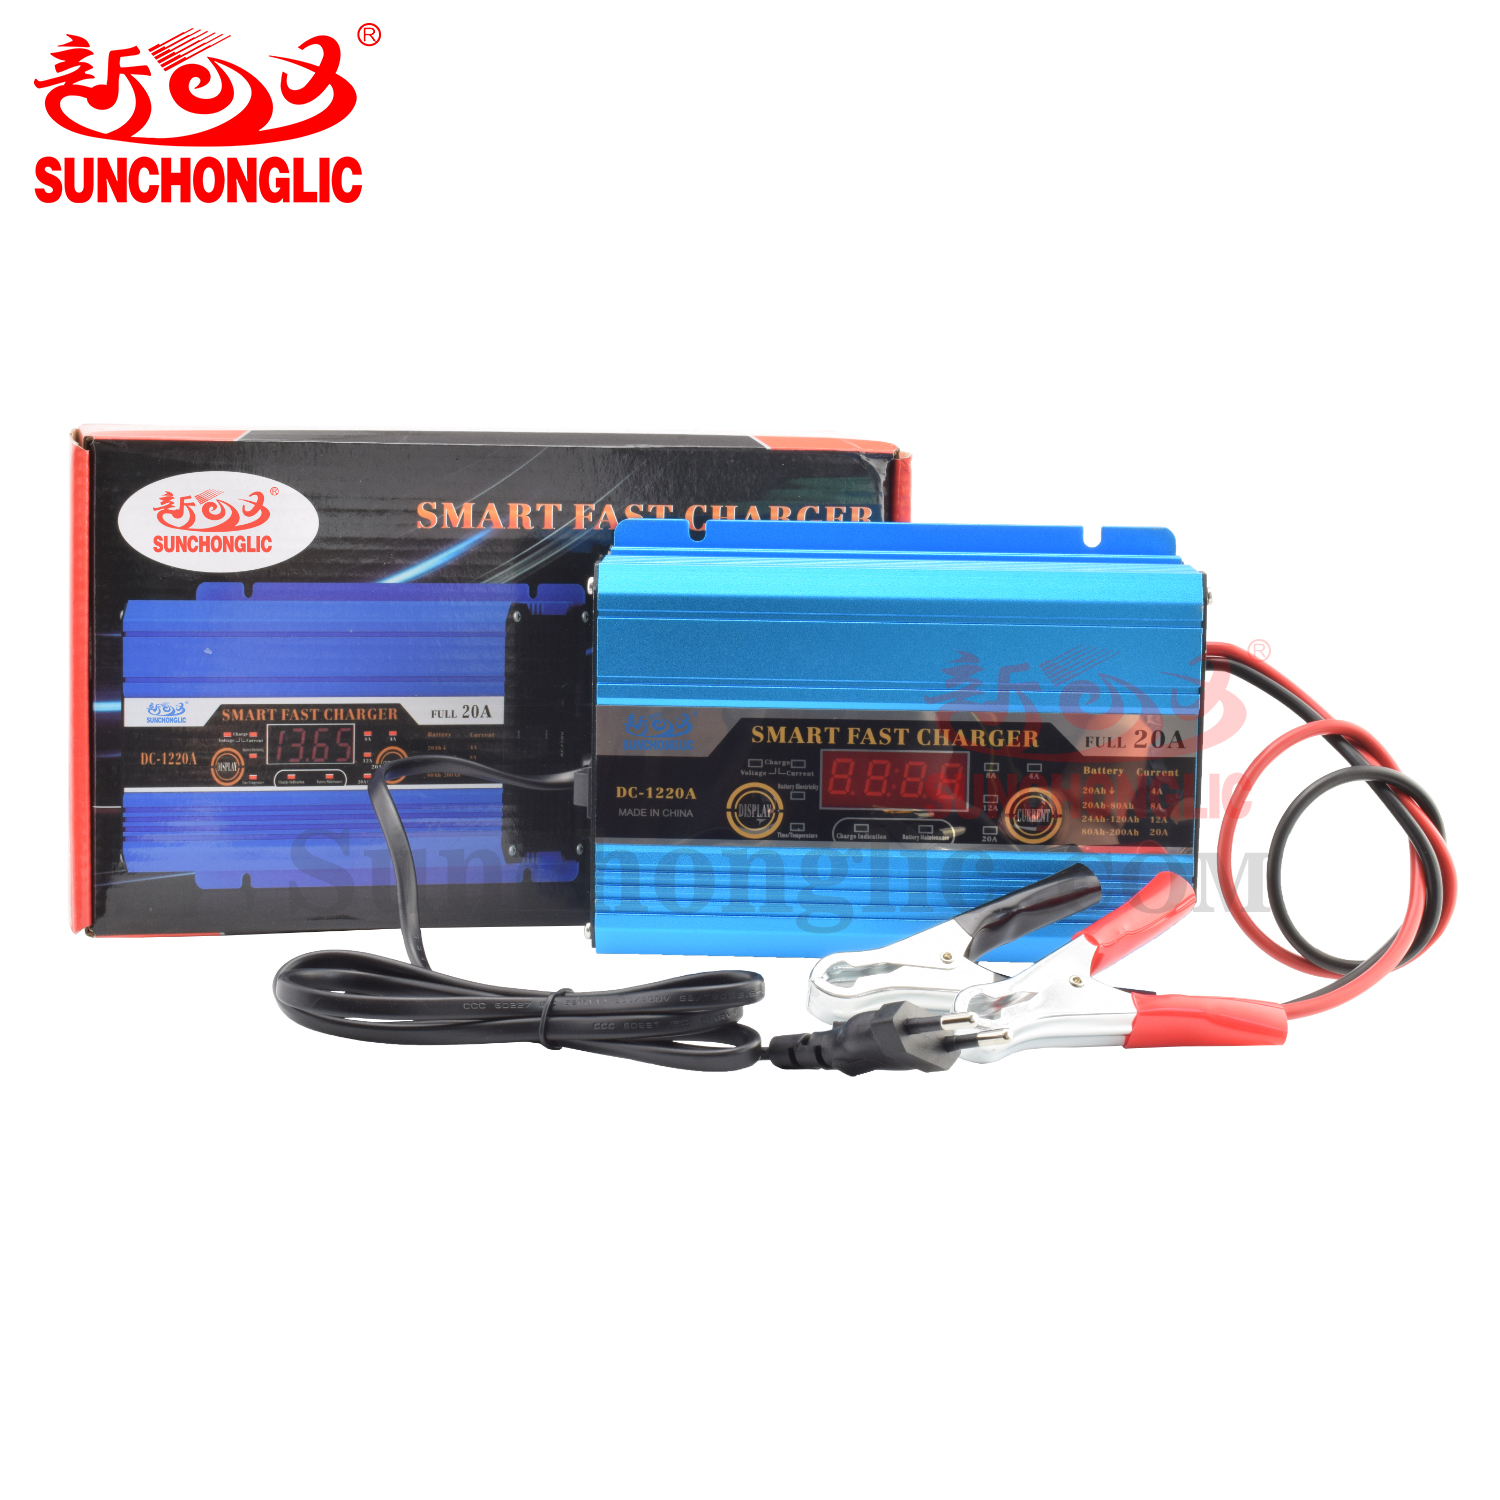 Sunchonglic intelligent 12v 20a car battery charger lead acid battery charger